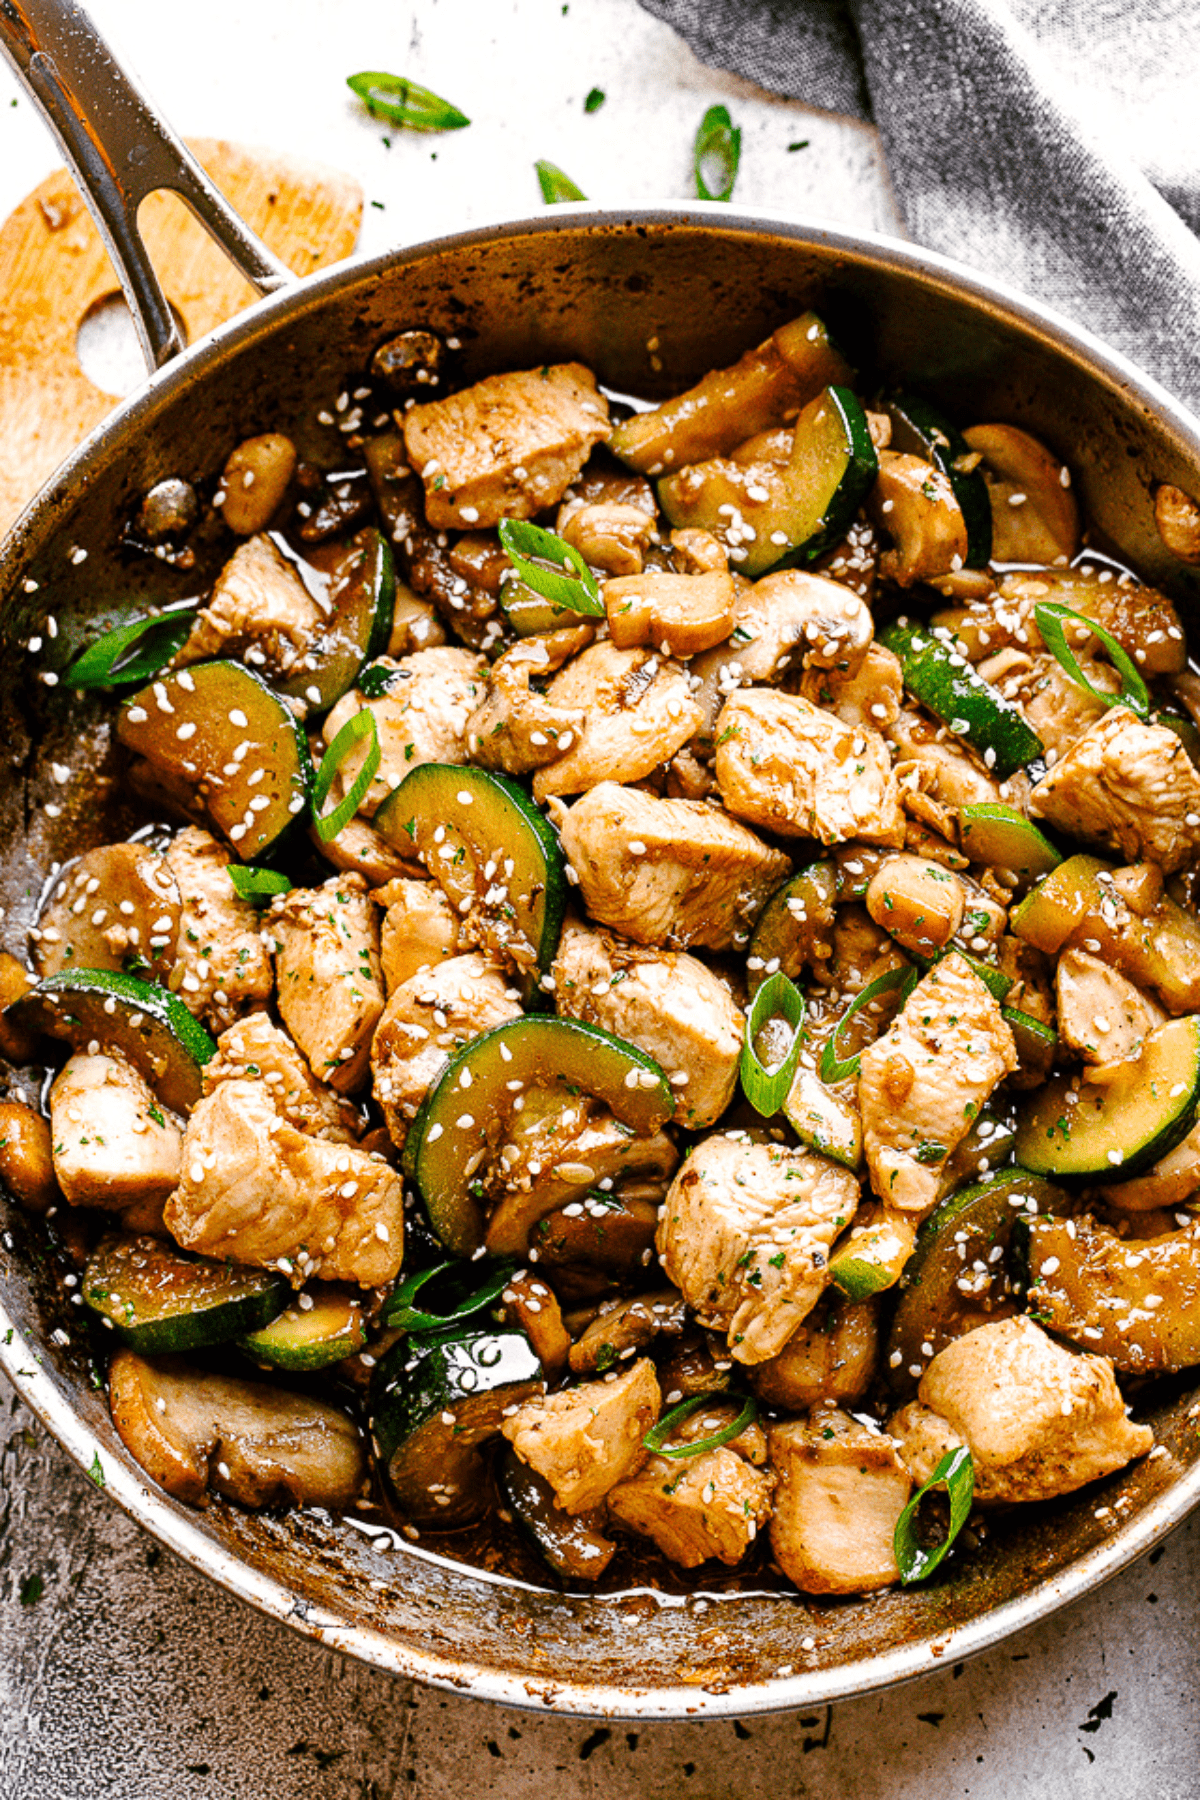 Photo of a skillet with stir fry chicken, mushrooms, and zucchini.